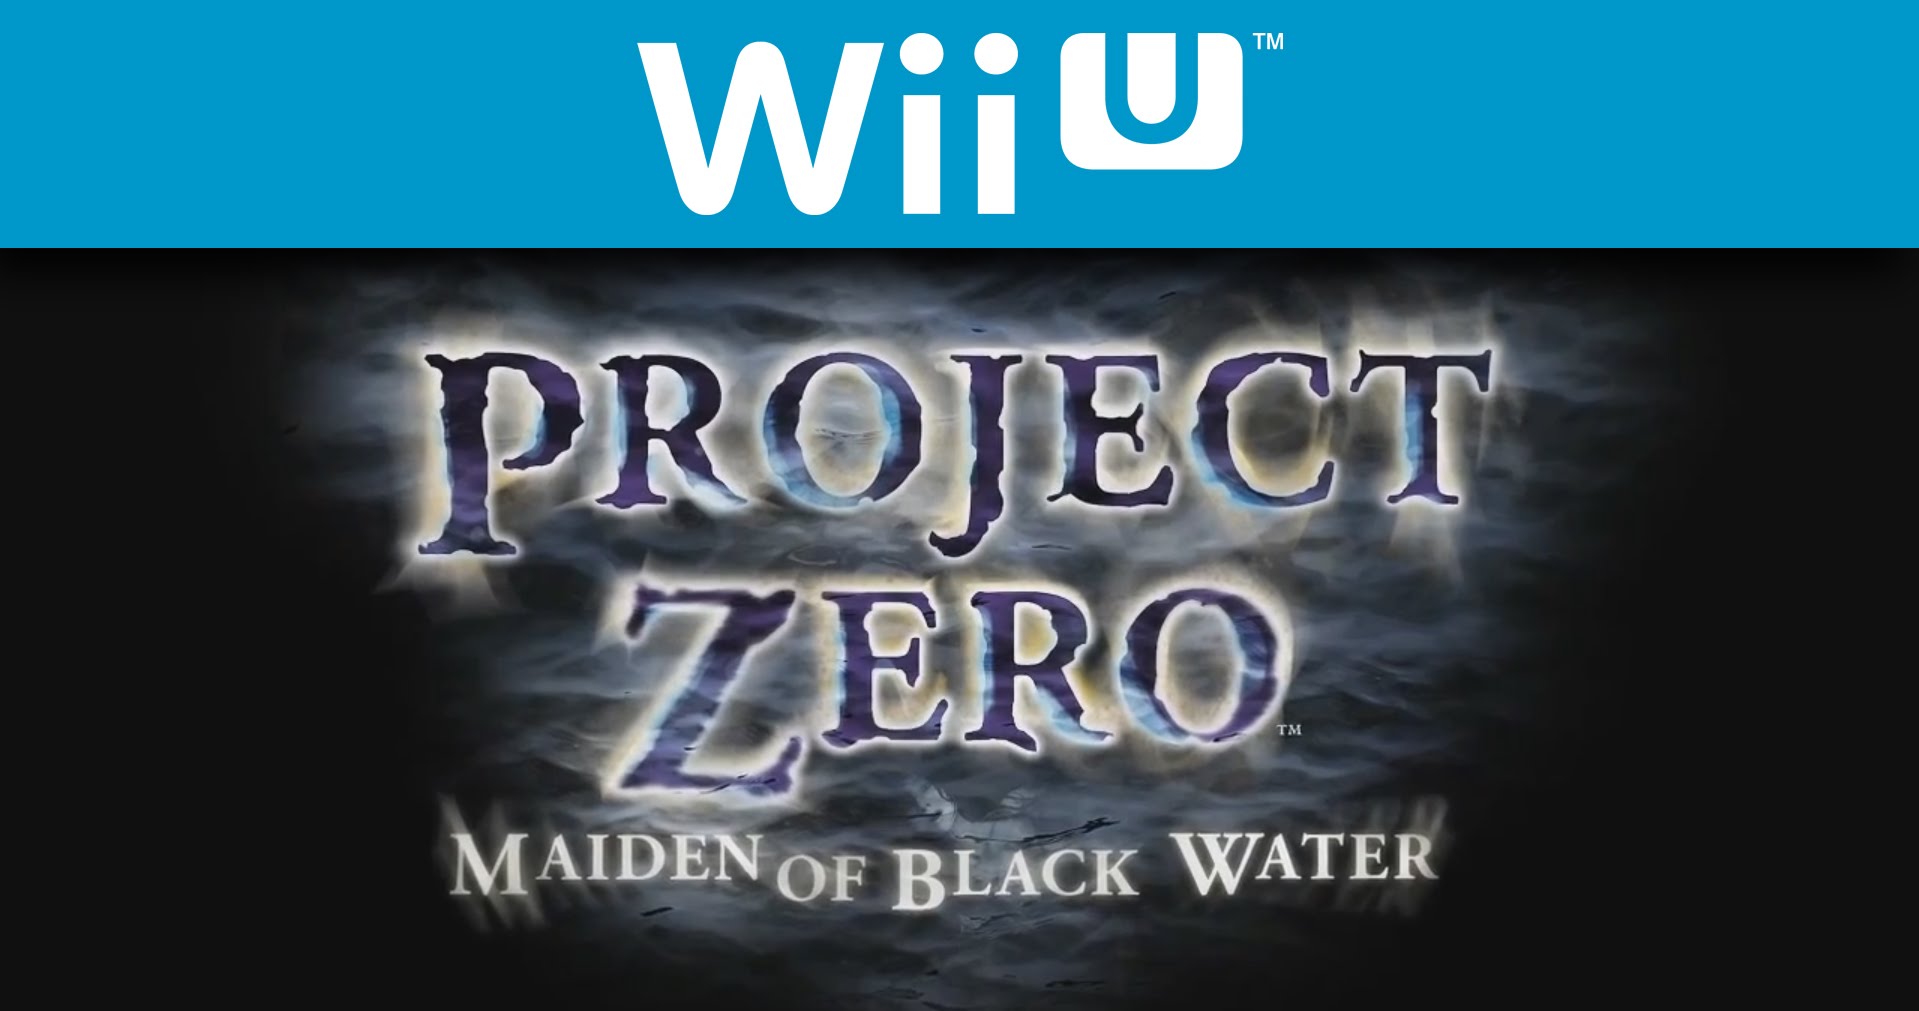 free download project zero maiden of black